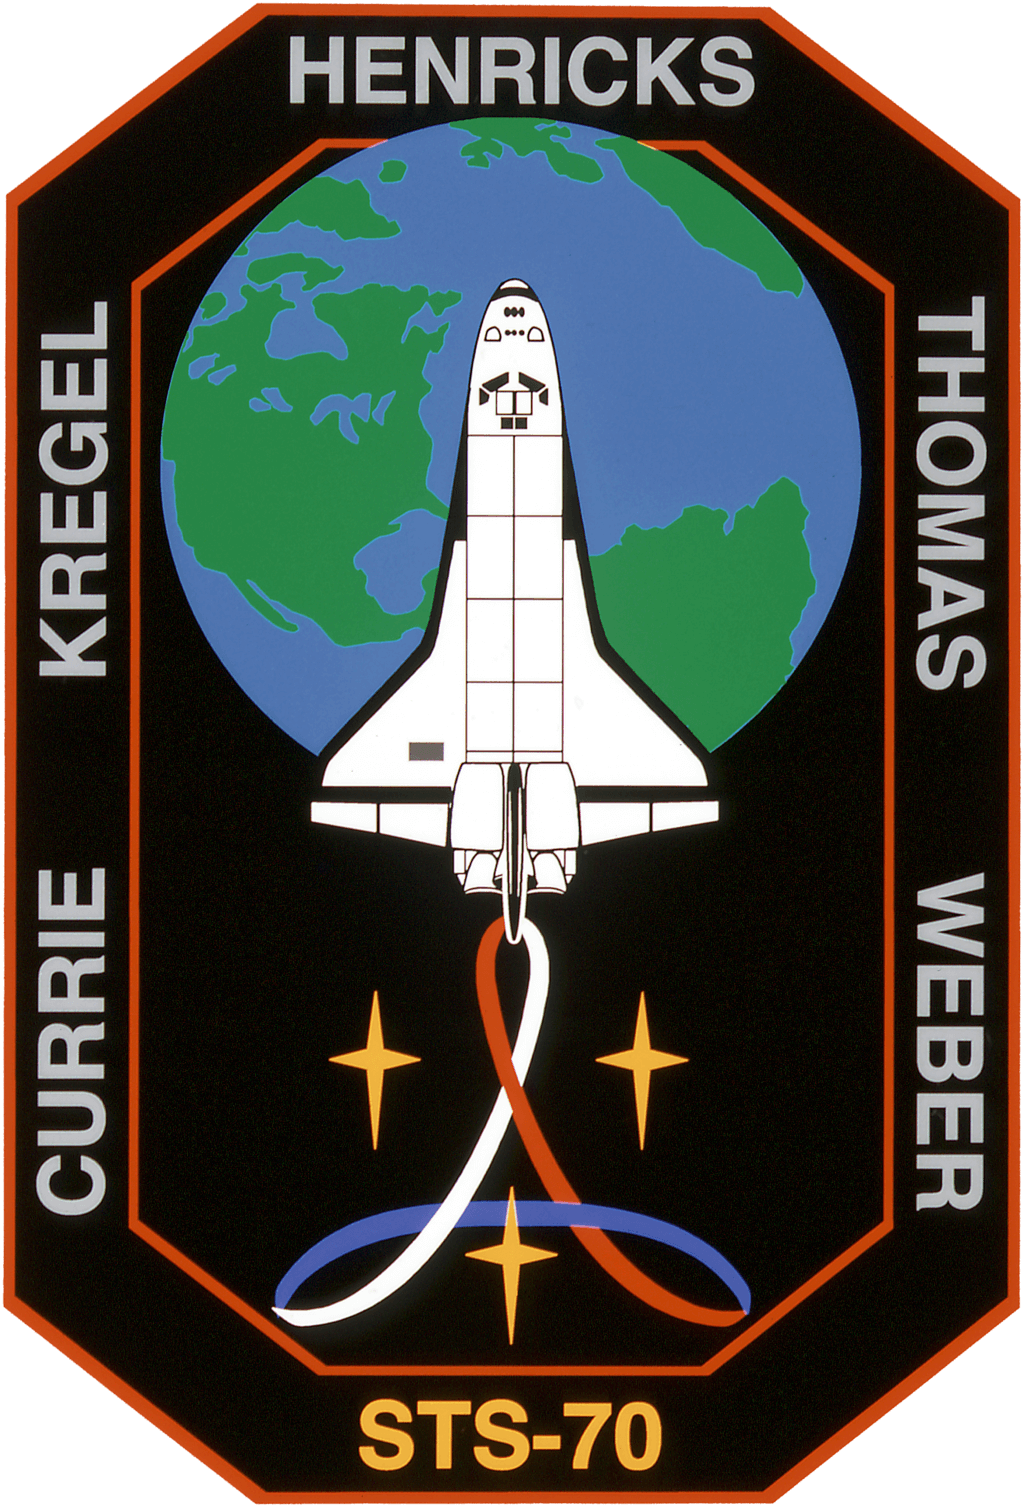 Mission patch for STS-70